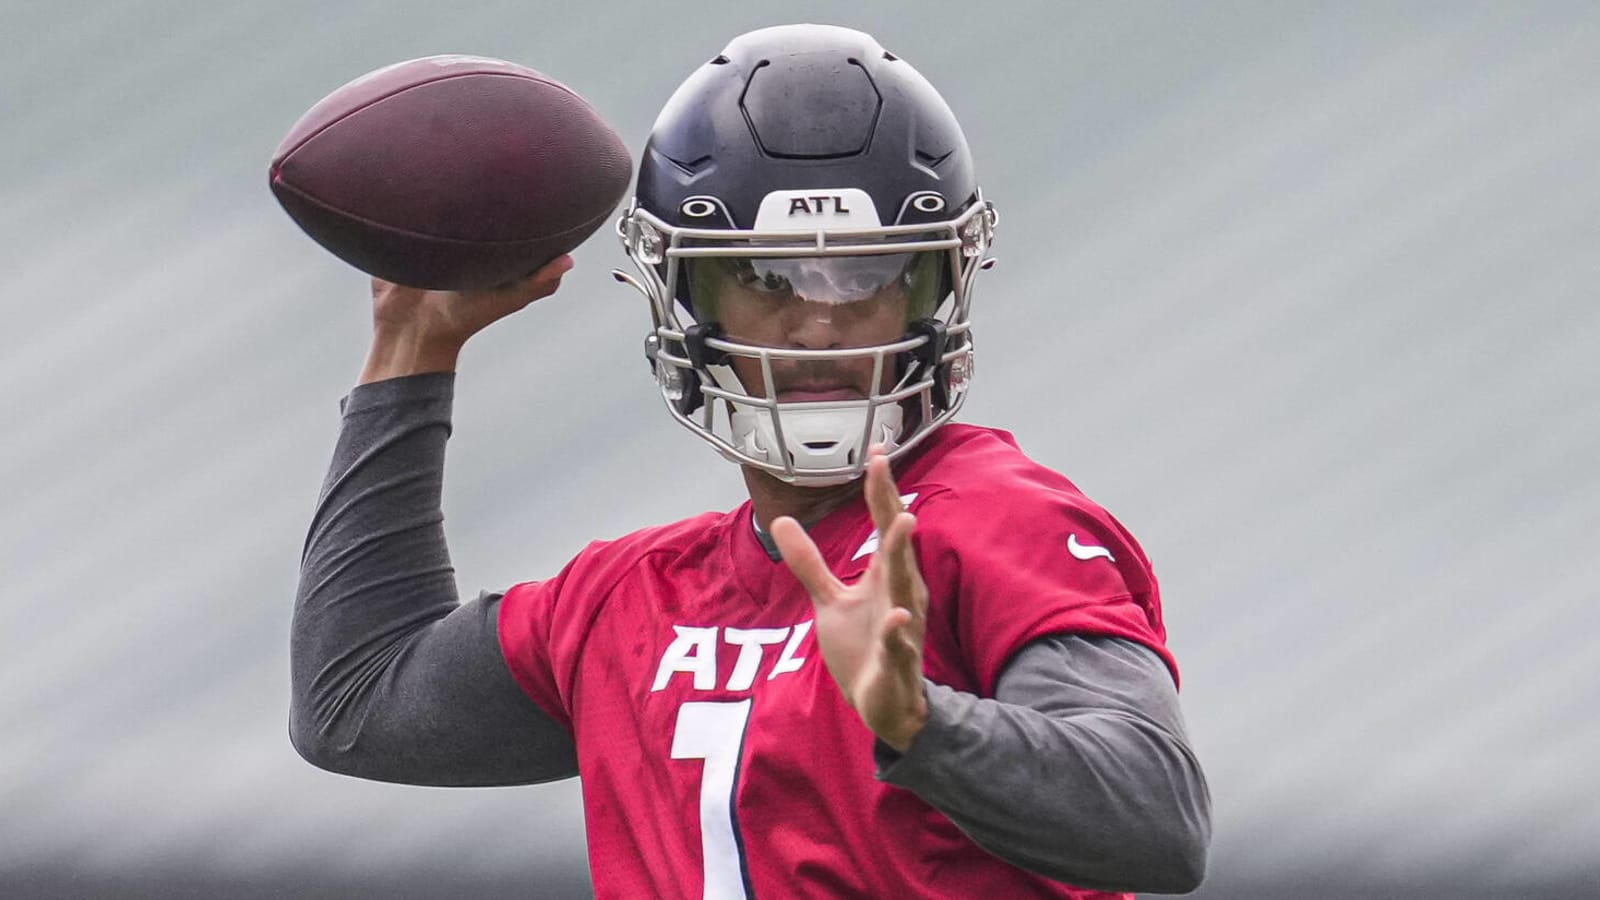 Former Falcon QB Marcus Mariota signs with Eagles